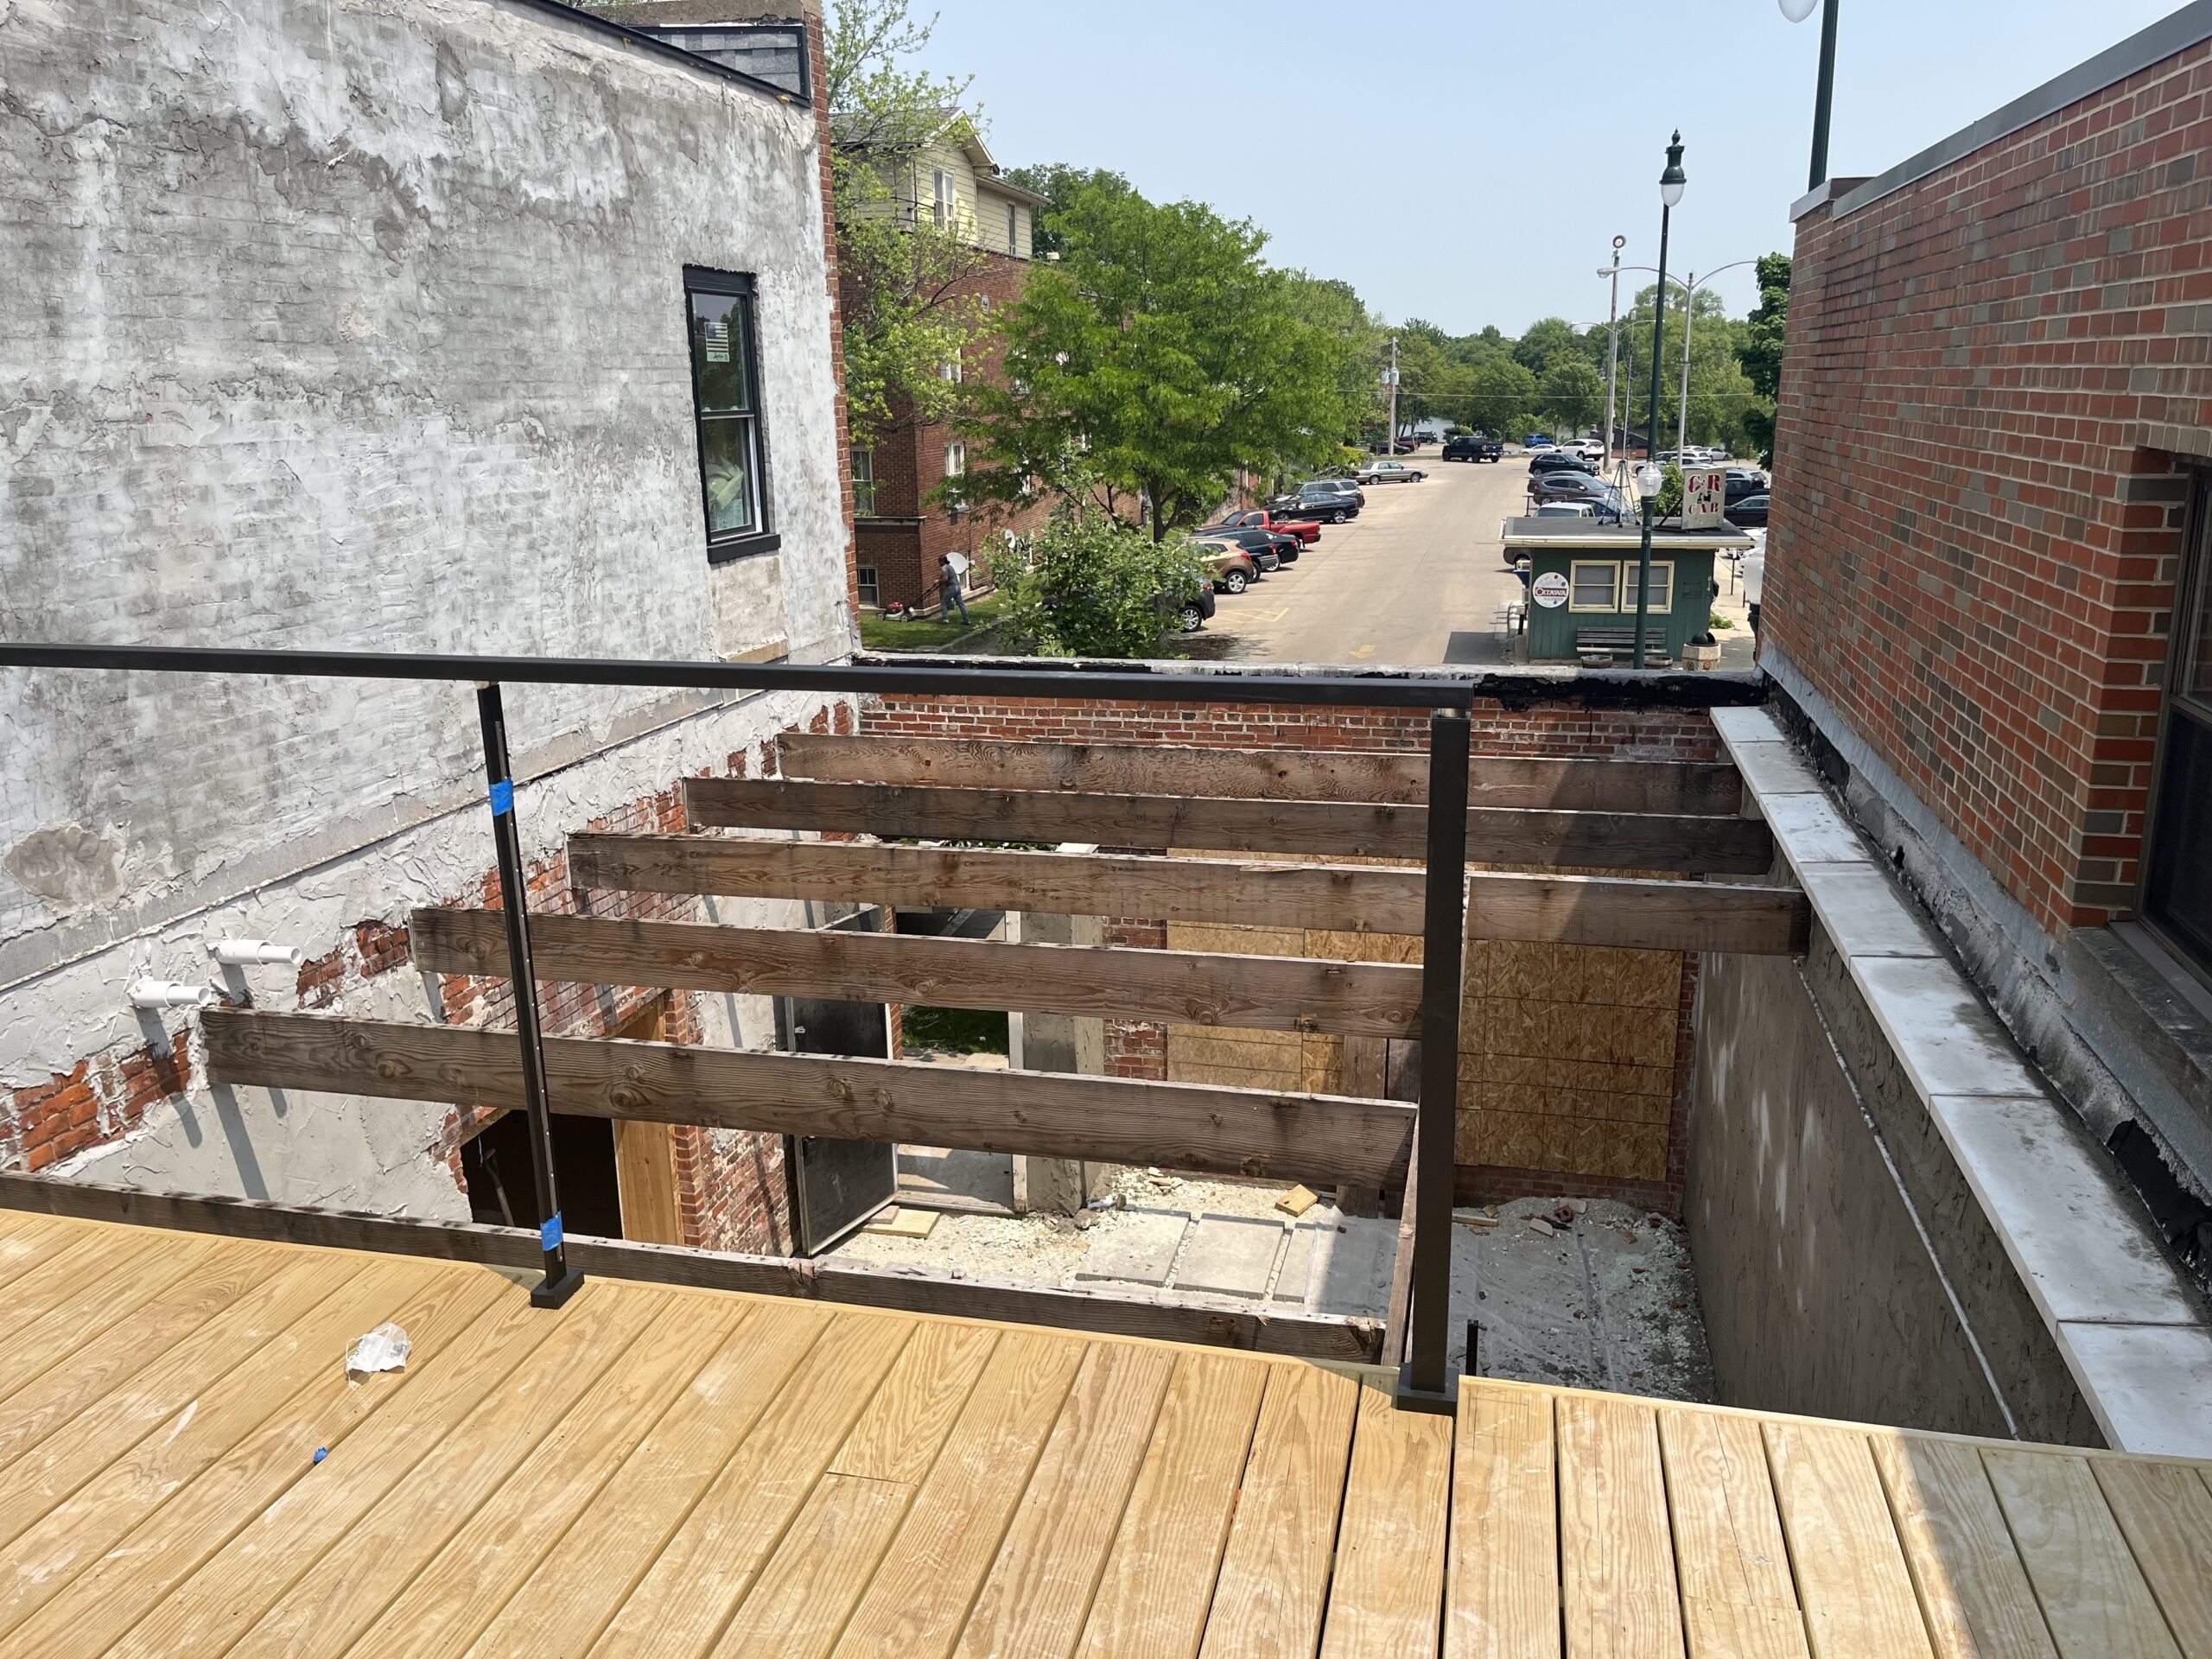 Upper view of the patio with slats running across